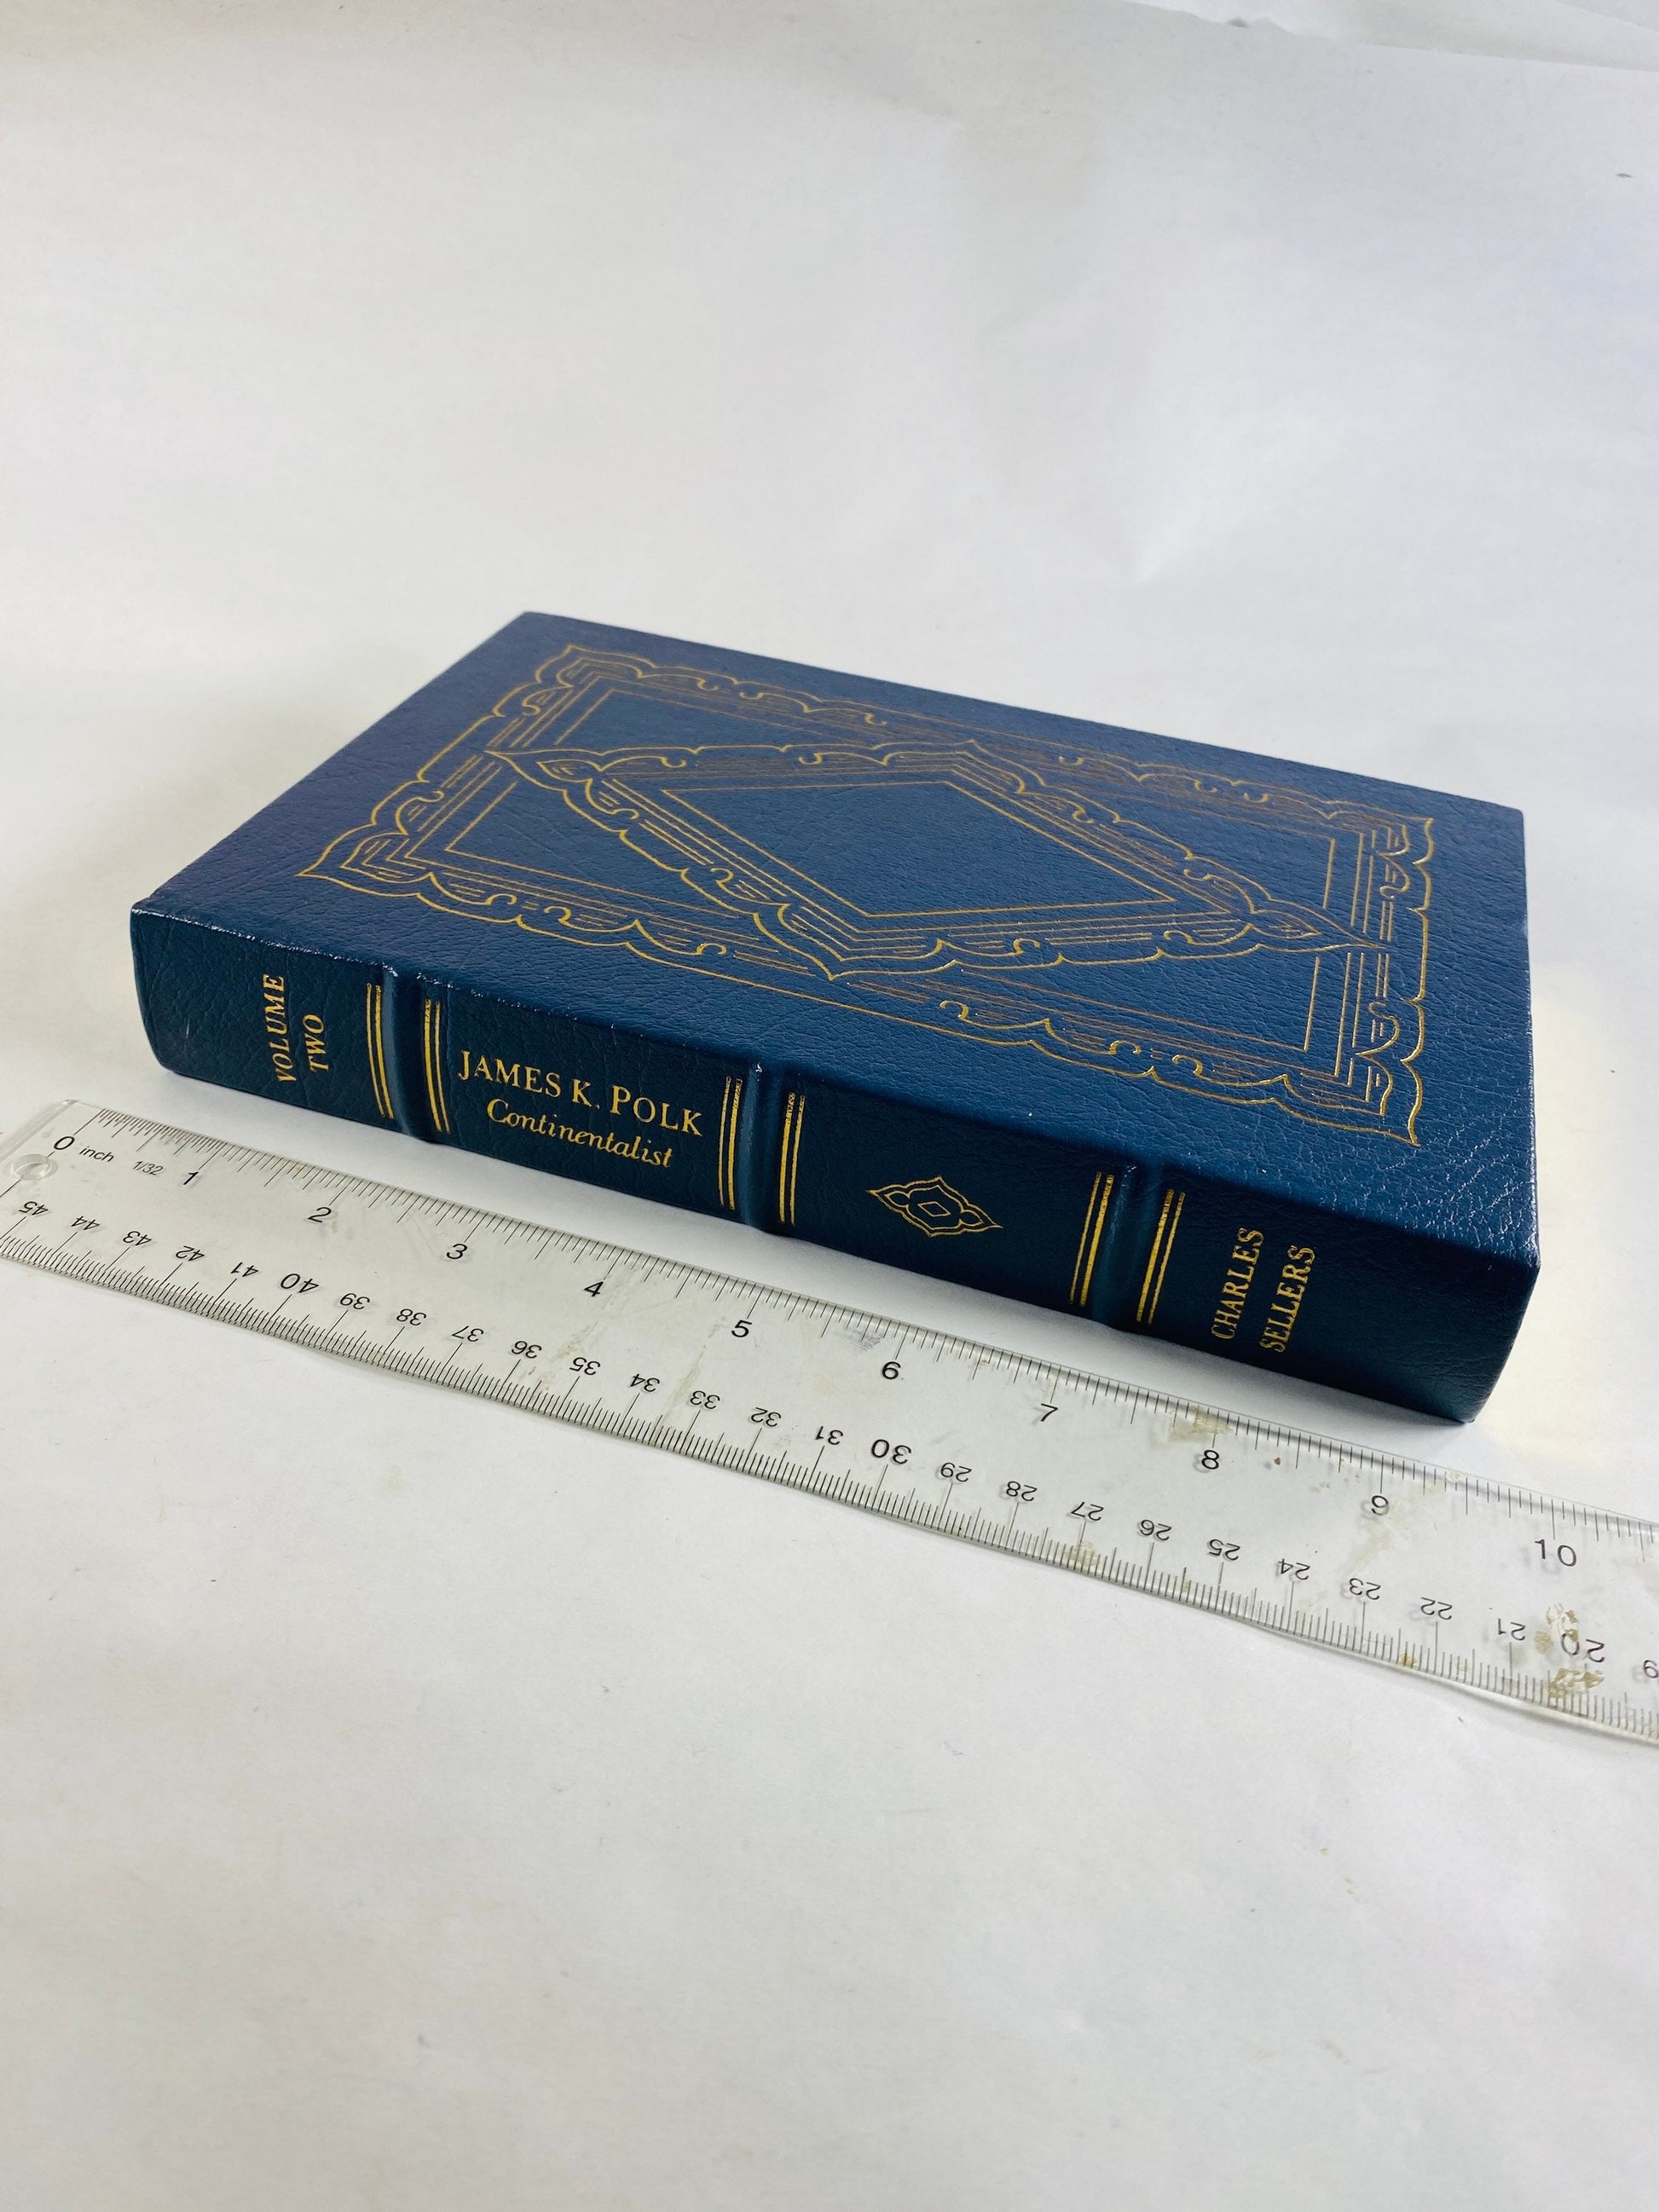 James Polk Continentalist Biography of American President vintage Easton Press book circa 1987 Volume 2 Blue leather with gold gilt